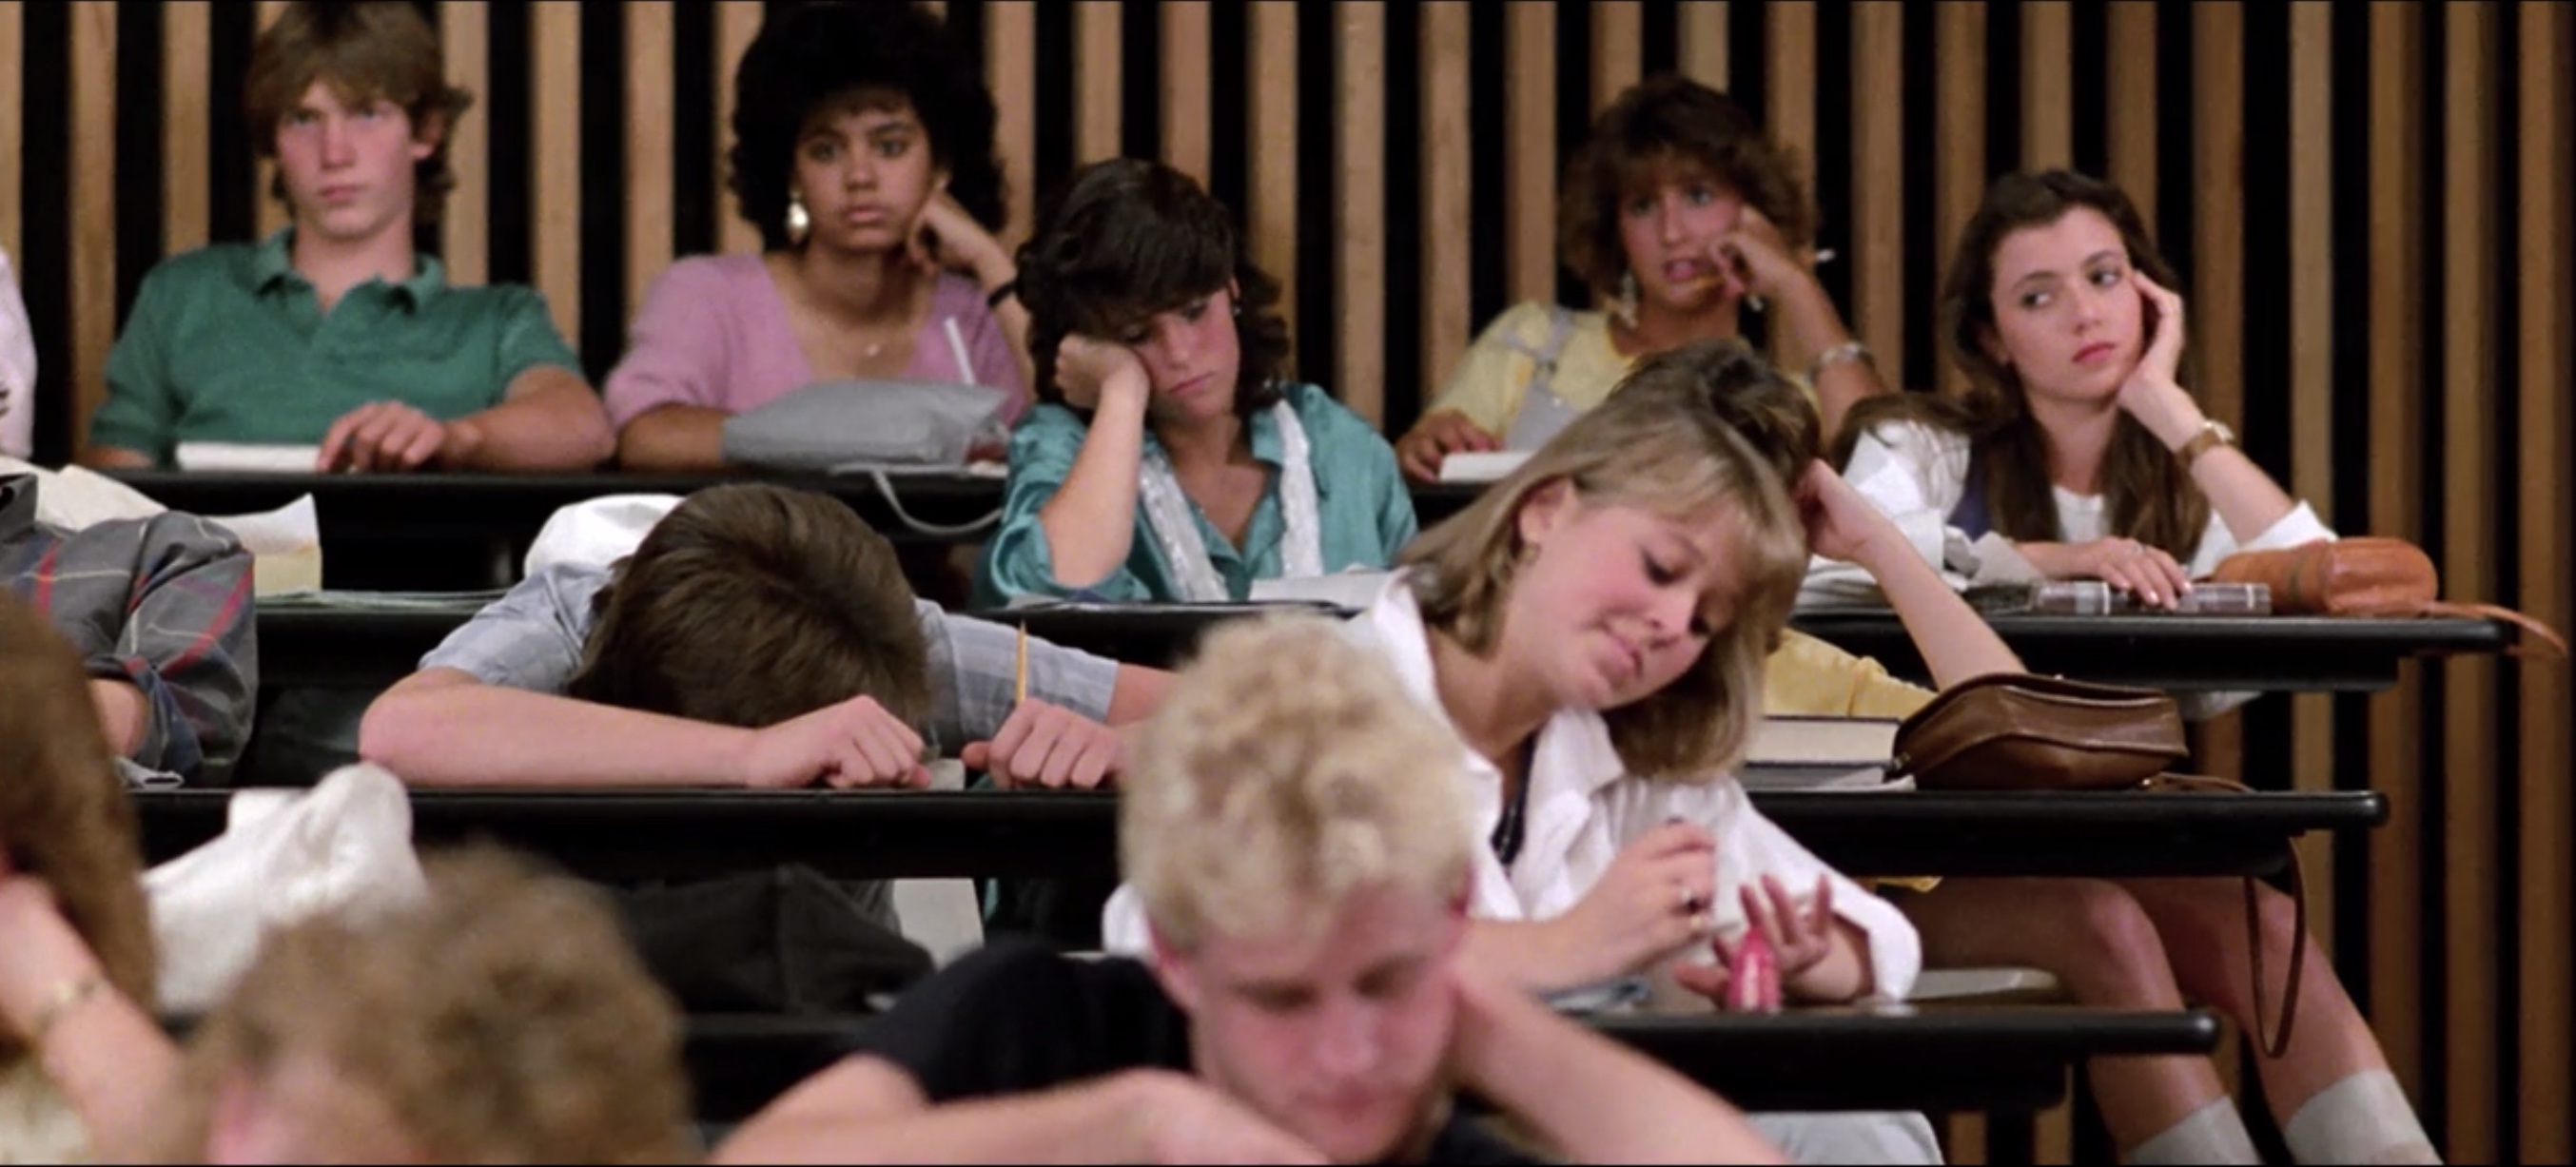 A scene from Ferris Bueller's Day Off movie